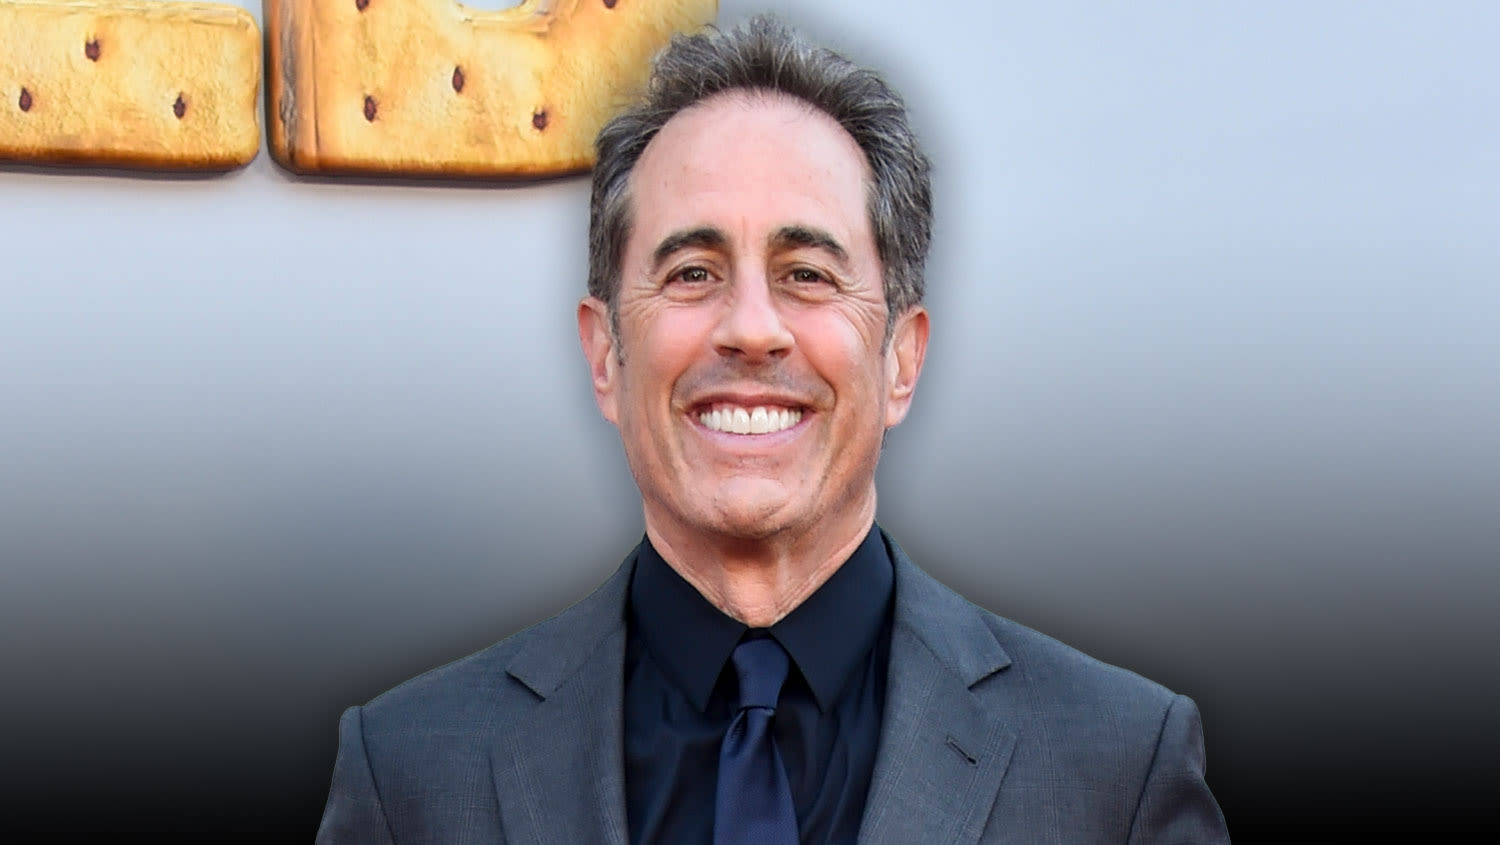 Jerry Seinfeld Says He Misses “Dominant Masculinity”: “I Like A Real Man”